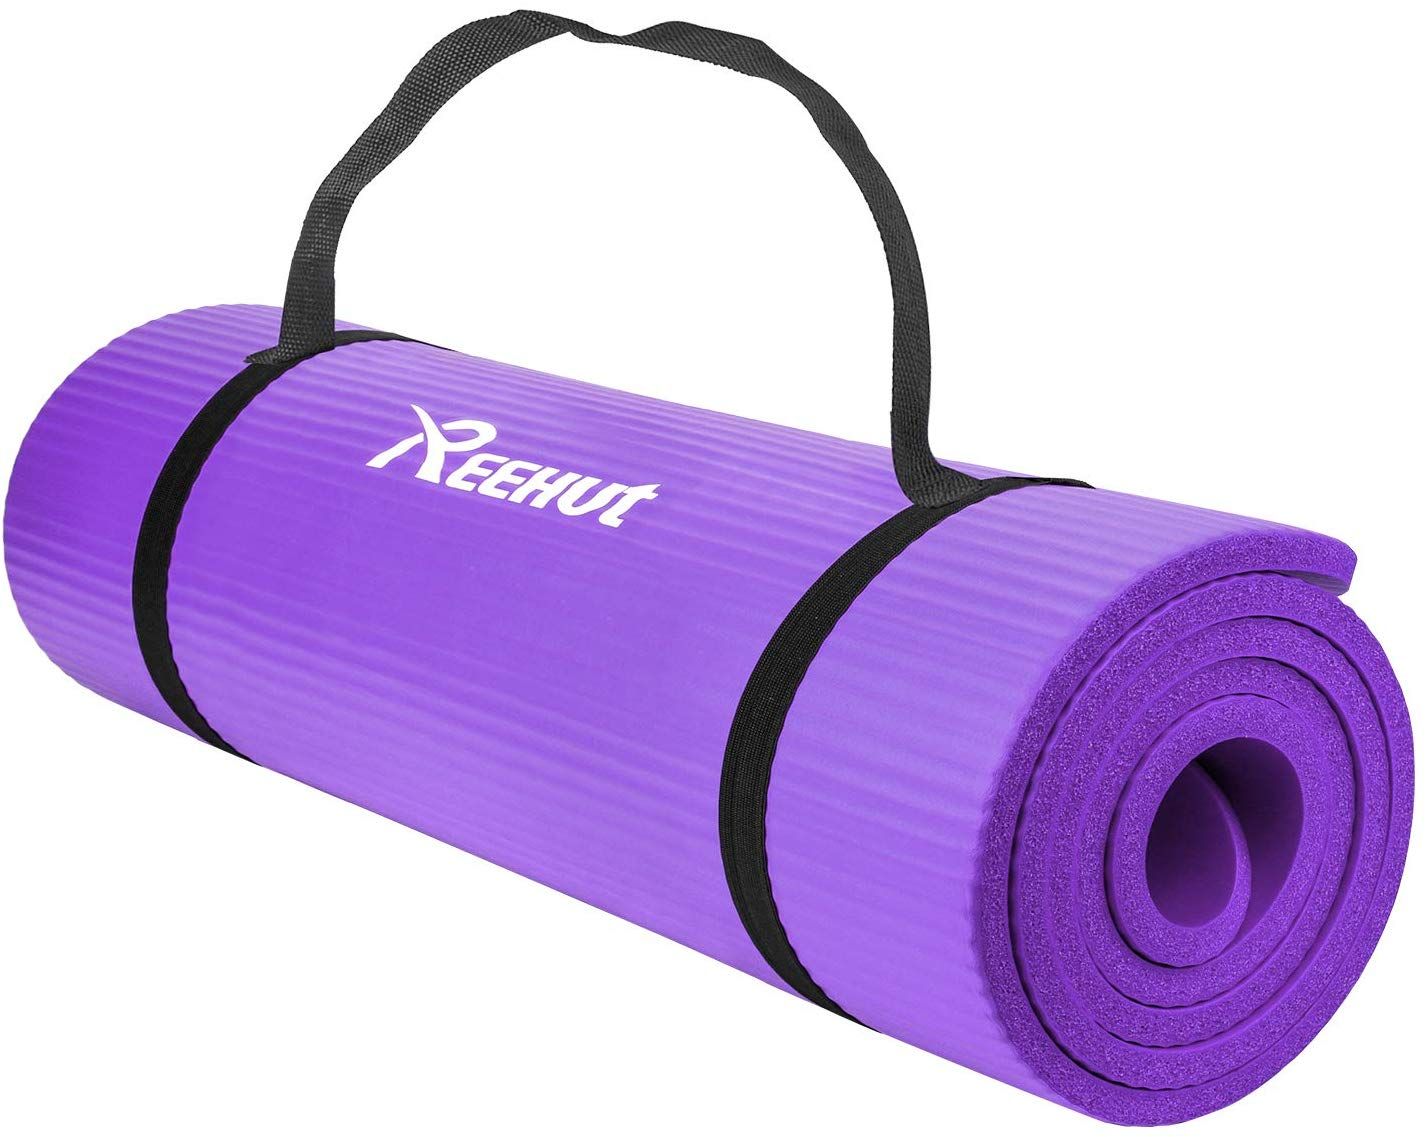 appropriate thickness of yoga mat